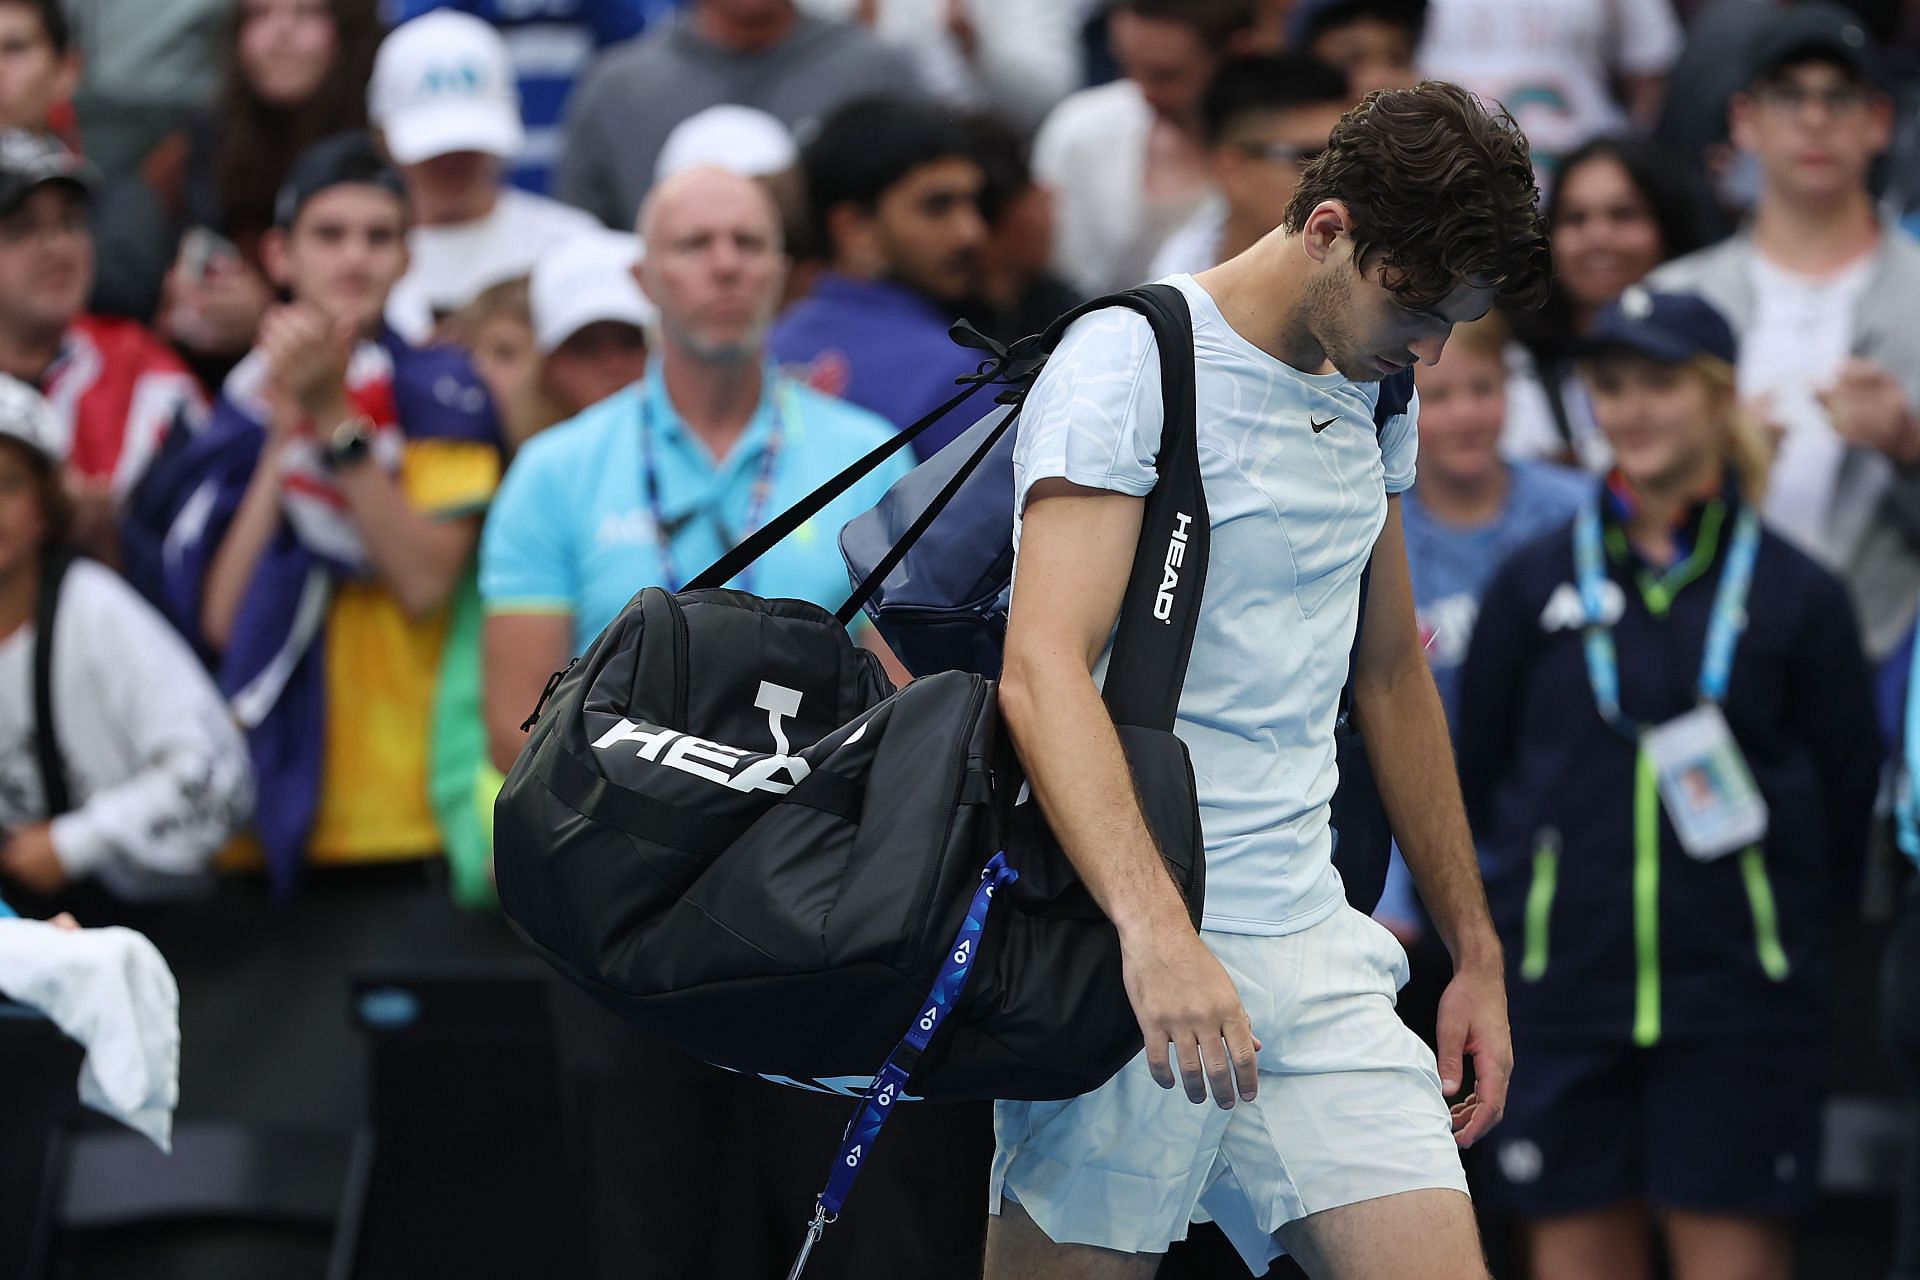 Dejected Taylor Fritz exits the John Cain Arena after loss to Aussie